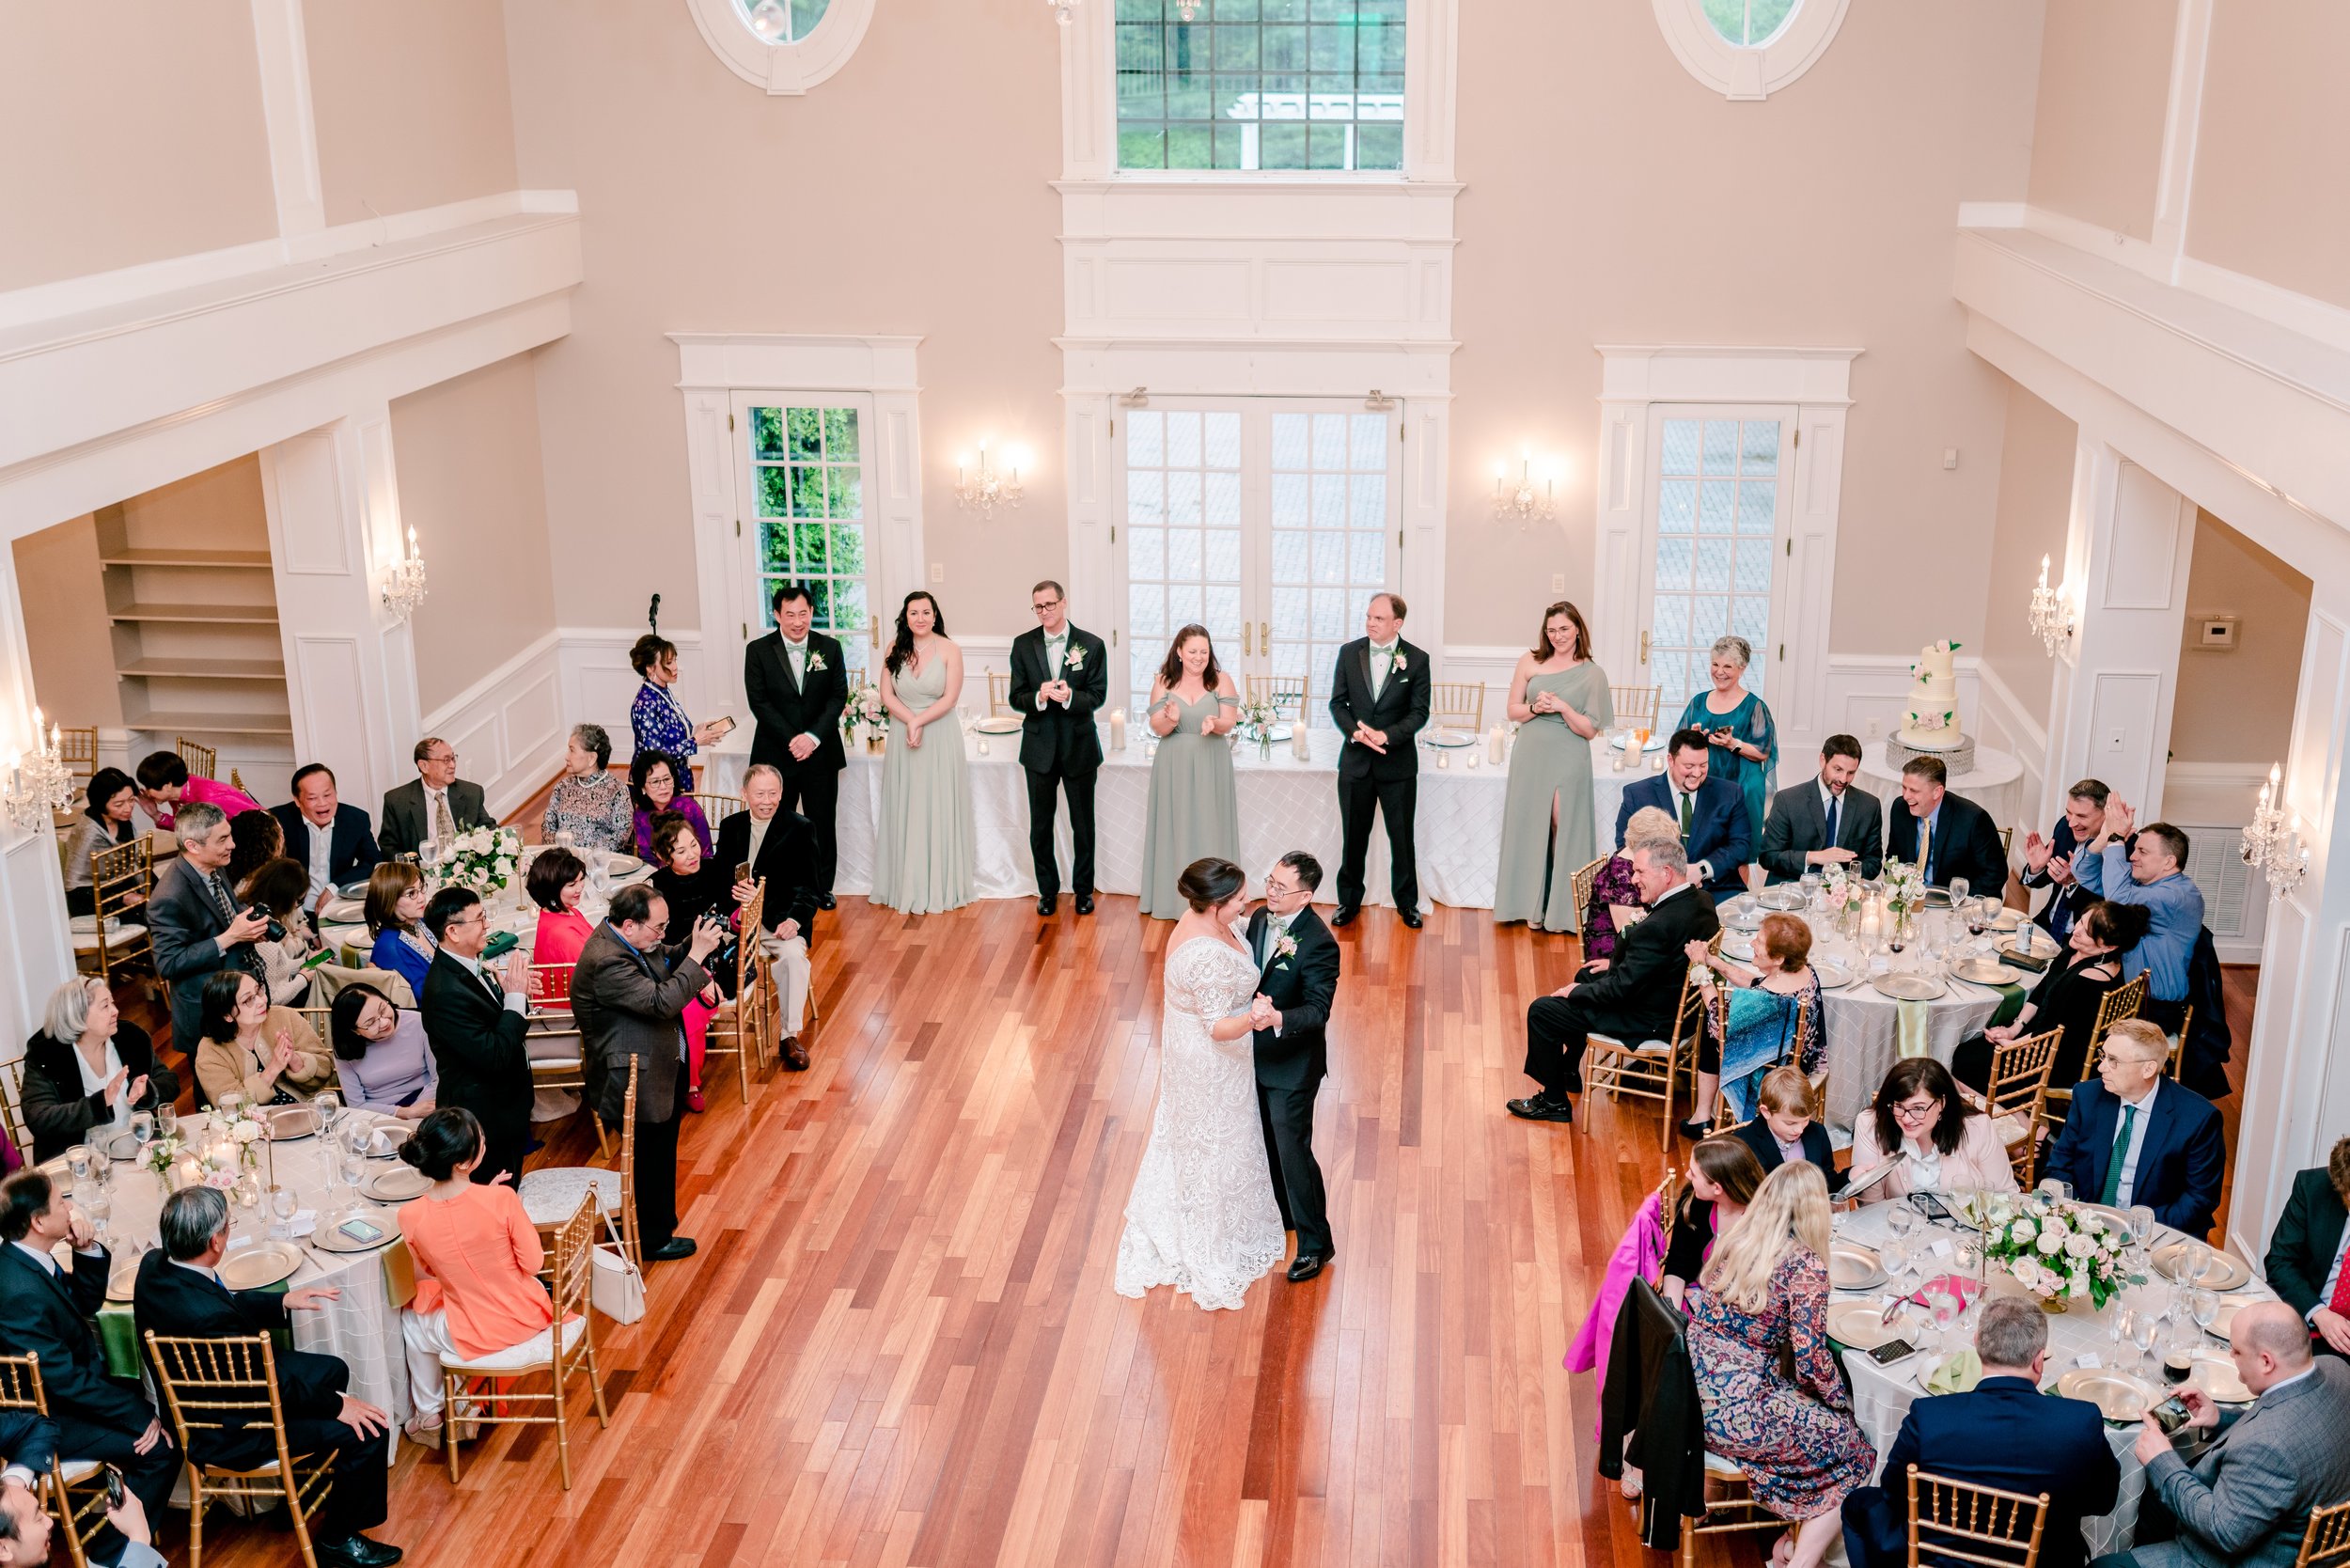 A bride and groom sharing their first dance in the ballroom of one of the best wedding venues in Loudoun County Virginia